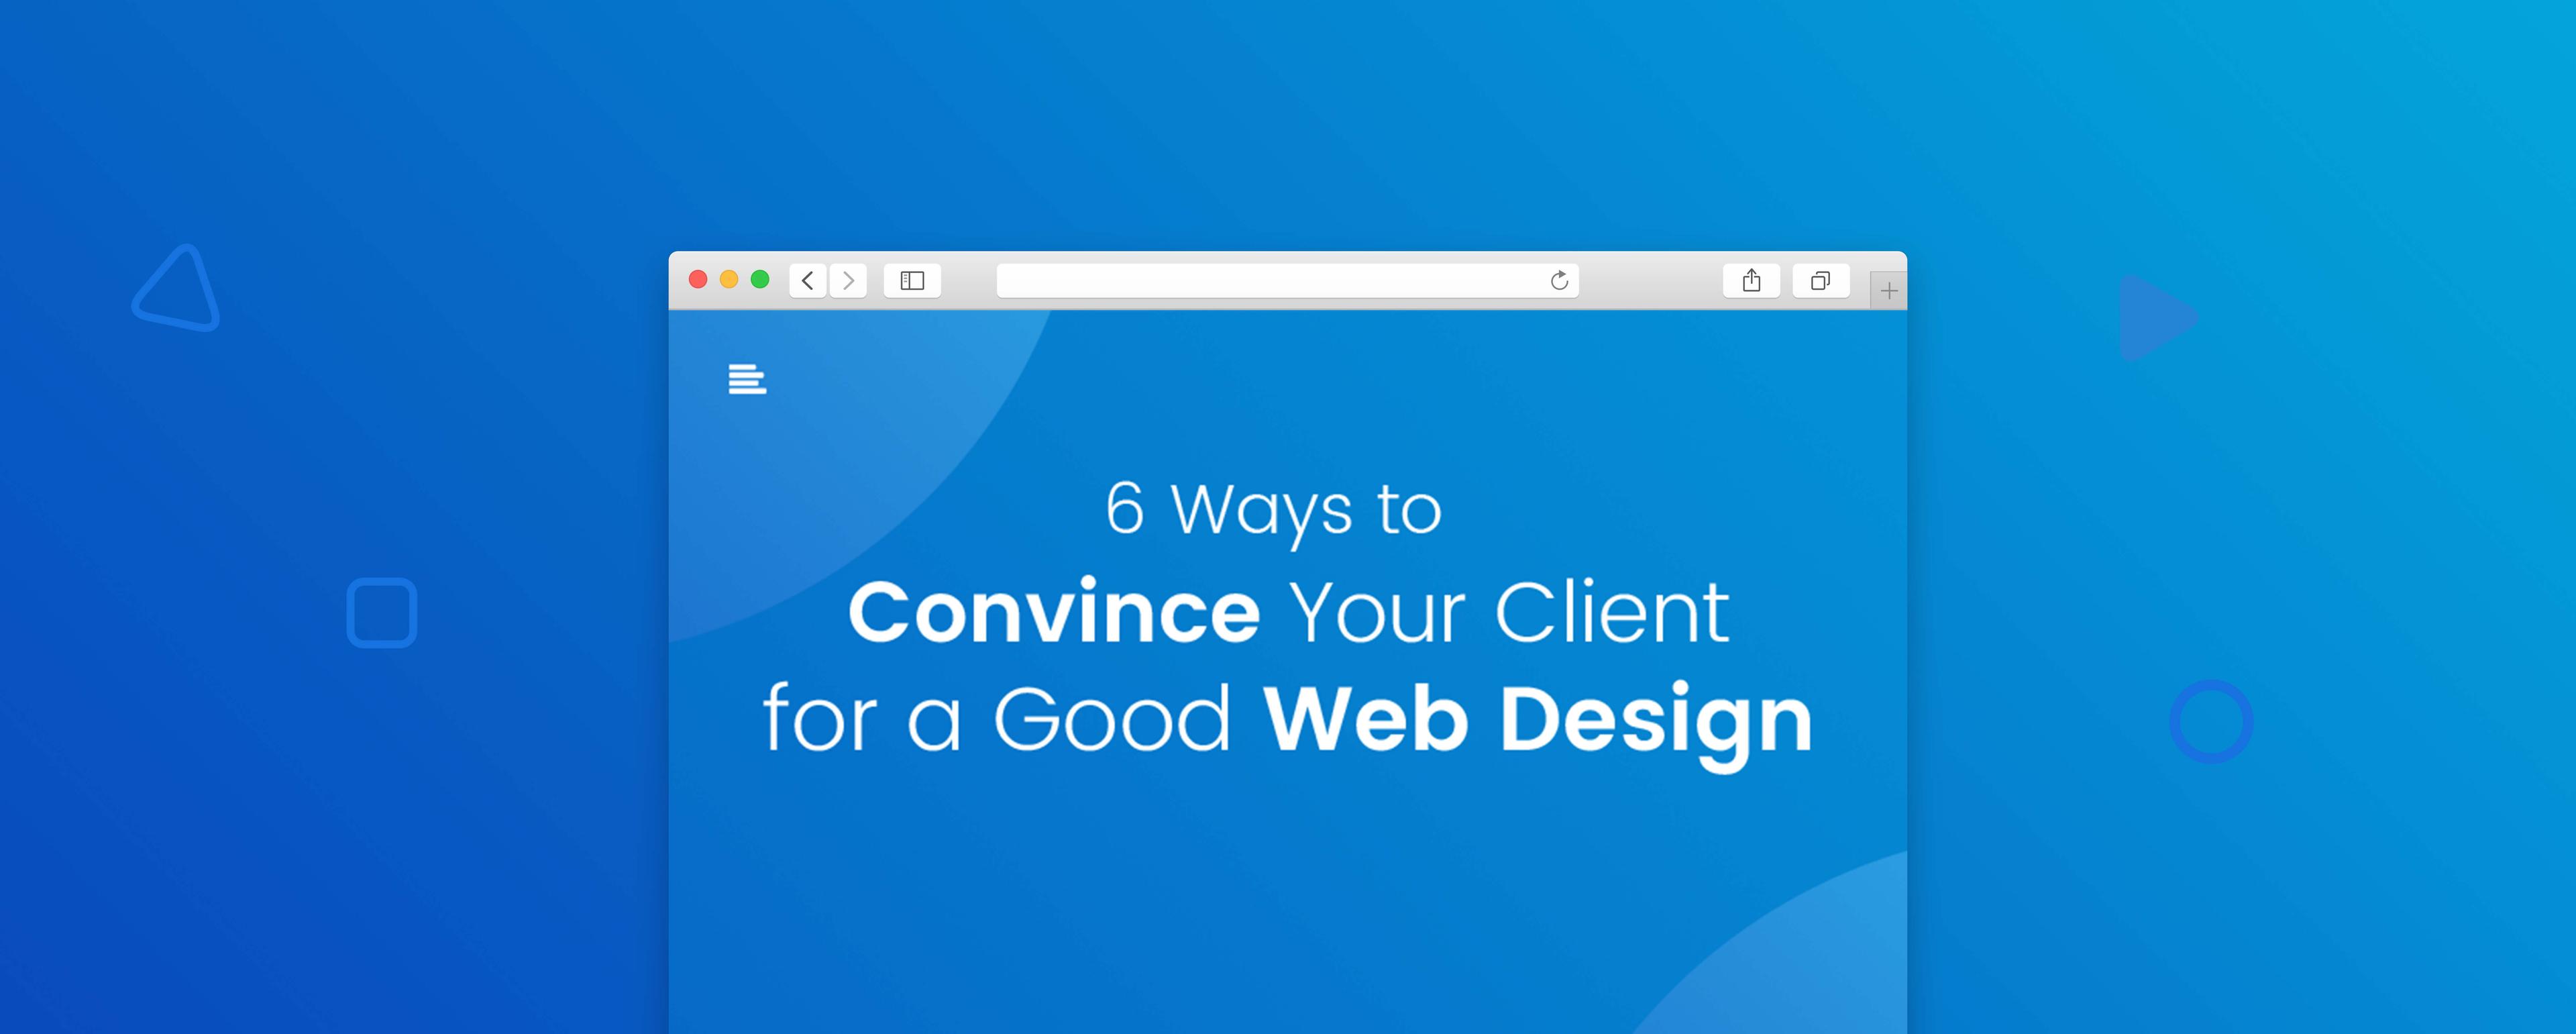 6 ways to Convince Your Client For a Good Web Design